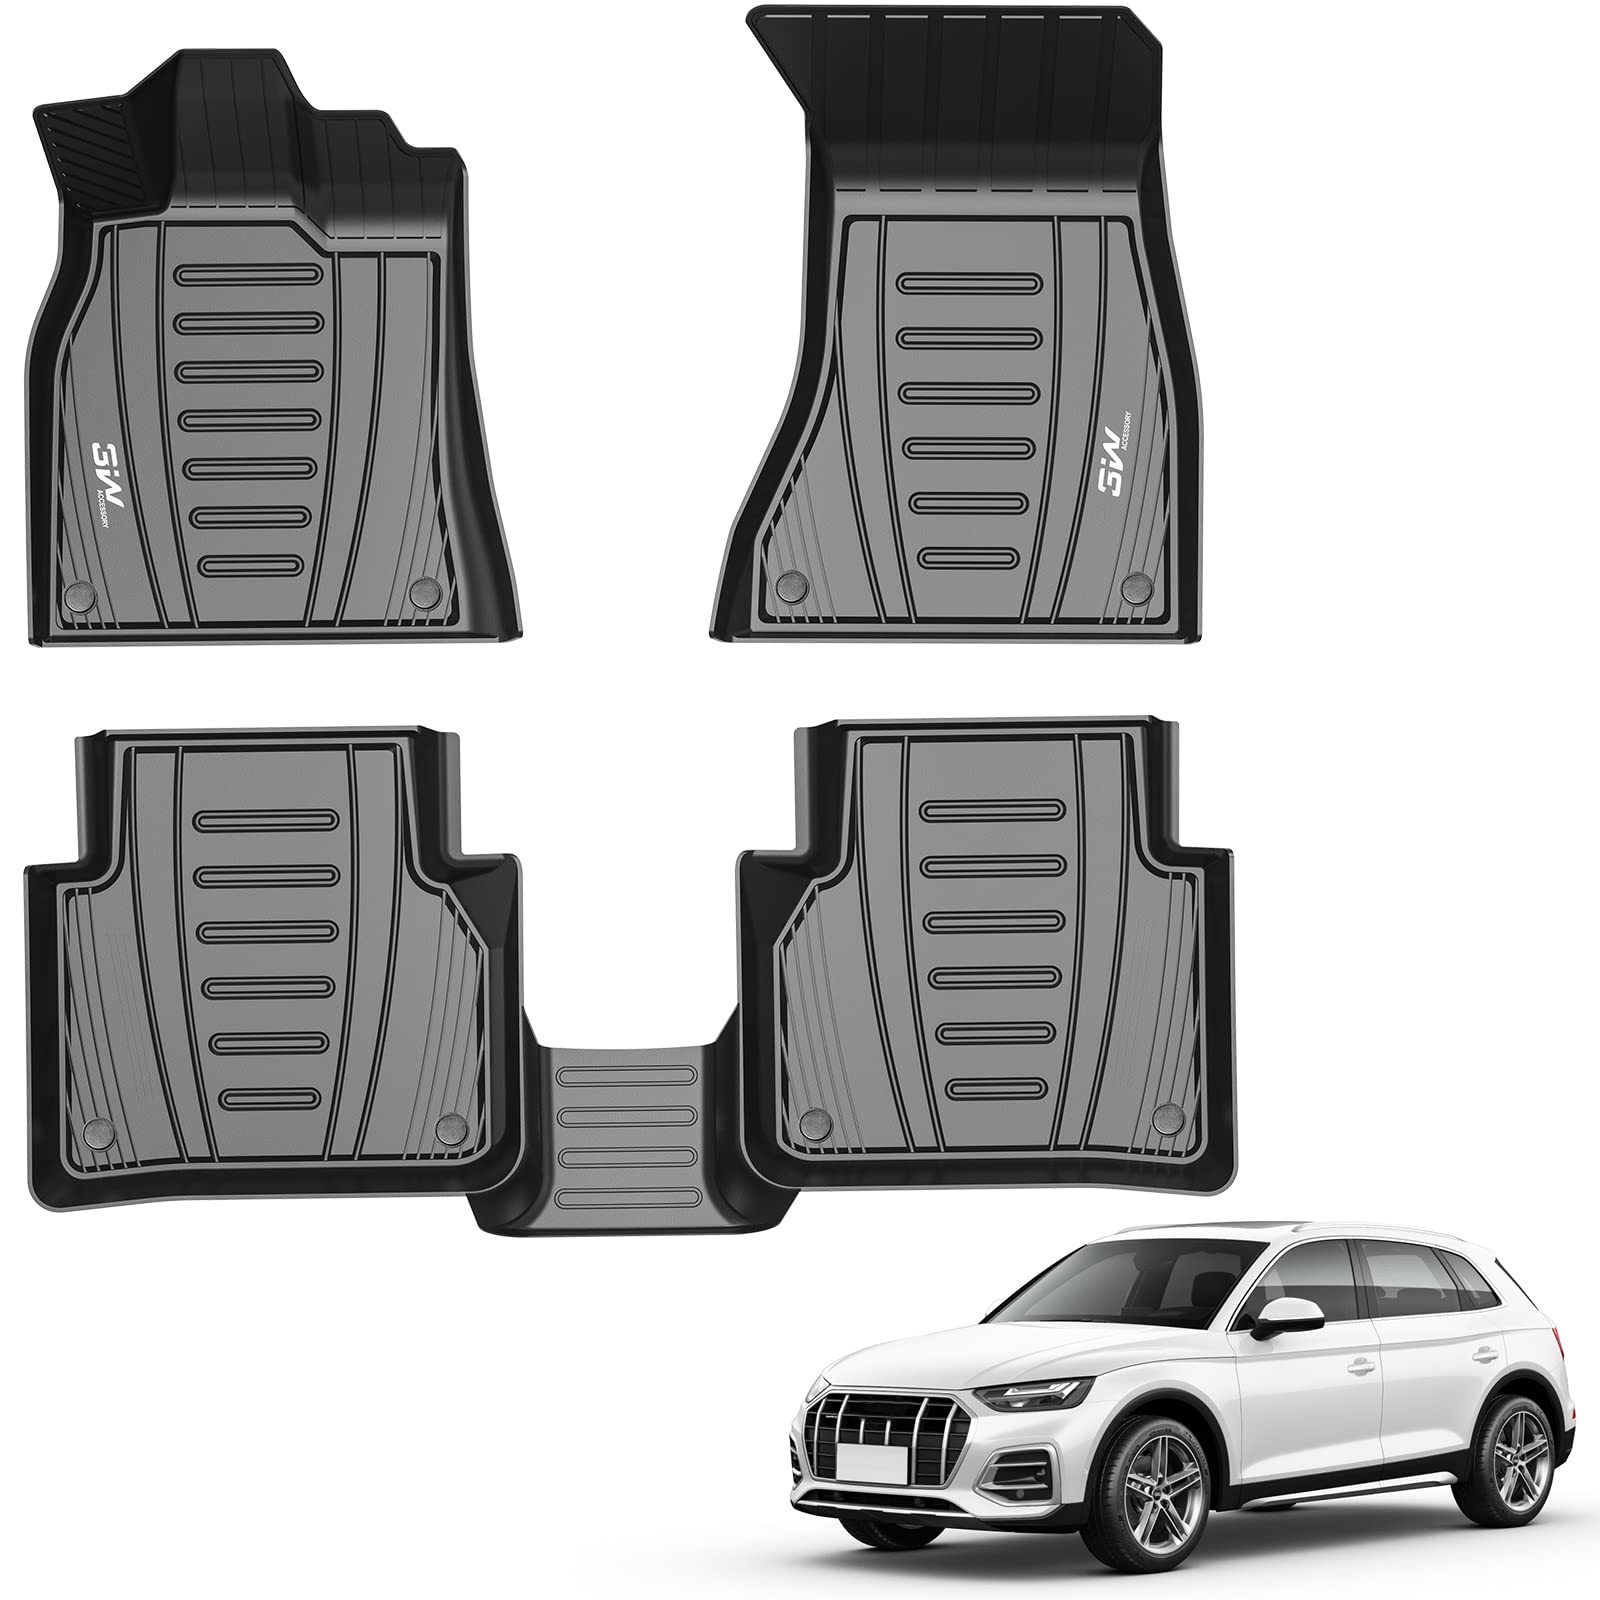 3W Audi Q5/SQ5 2018-2024 Custom Floor Mats TPE Material & All-Weather Protection Vehicles & Parts 3W 2018-2024 Q5 2018-2024 1st&2nd Row Mats